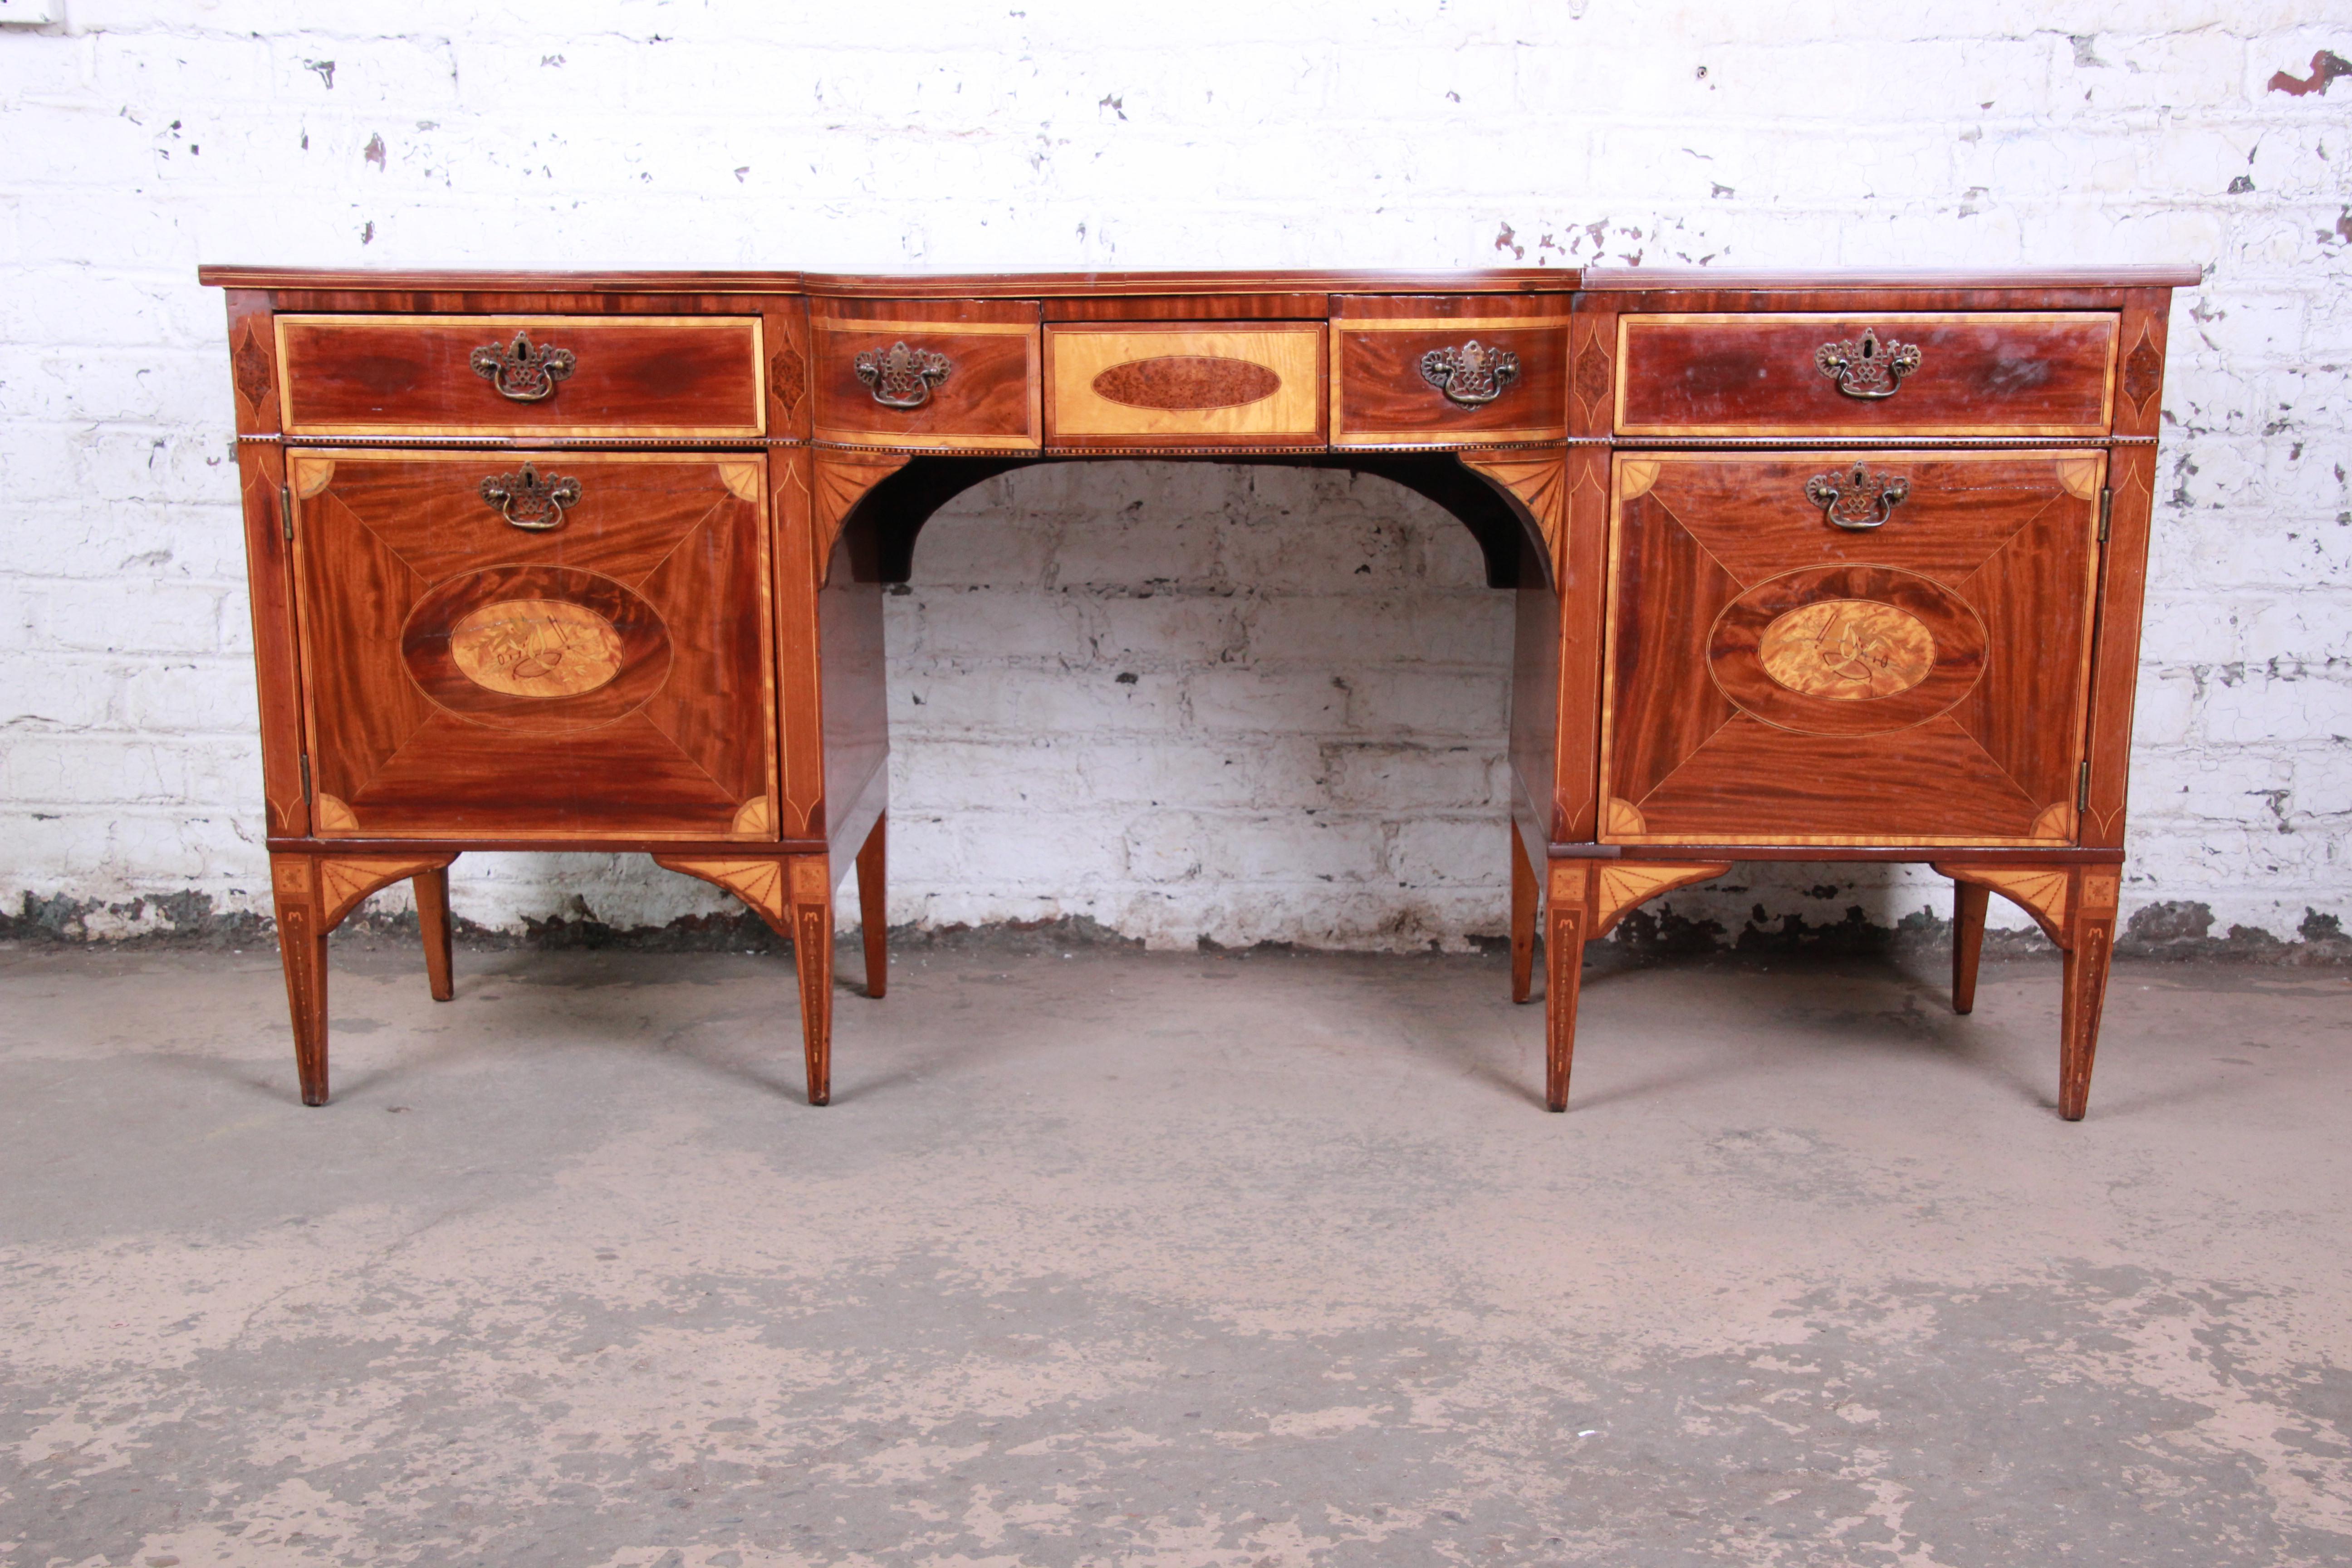 A truly rare and exceptional English Sheraton bow-fronted mahogany sideboard, circa 1820. The sideboard features stunning flame mahogany and birch wood grain, inlaid with chequer pattern bands and stringing and with fan pattern medallions to the